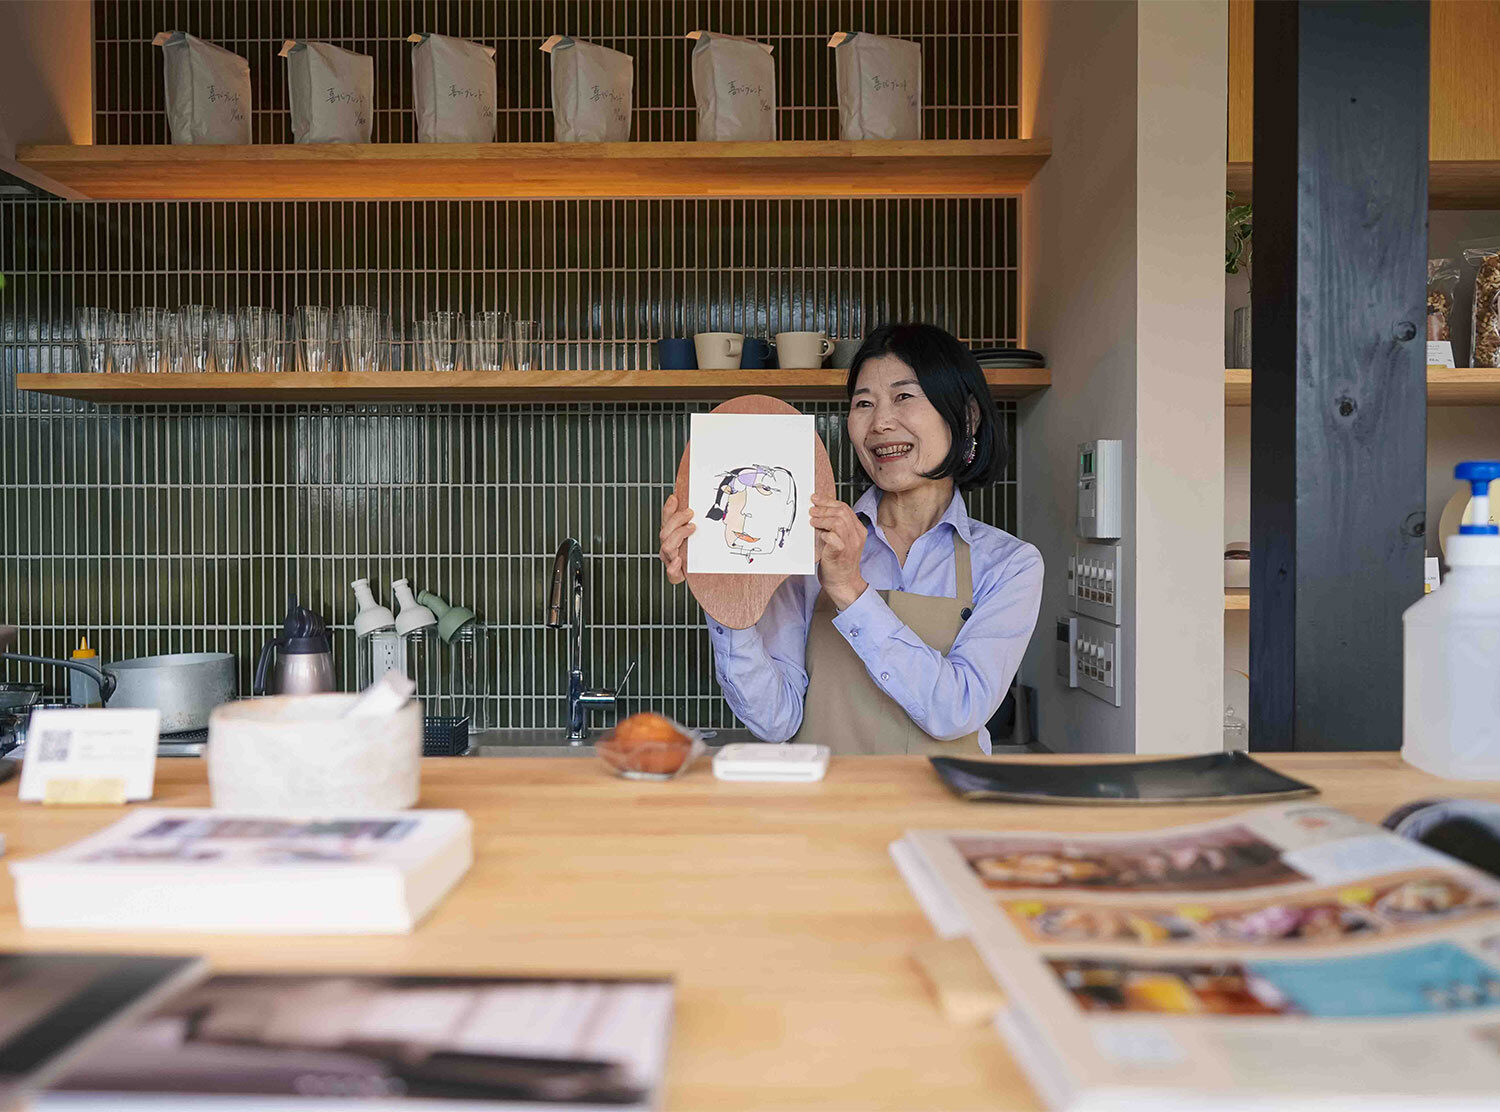 Maana Homes Pictured here is Keiko-San, whose genuine passion for hospitality inspired us to stay way beyond breakfast